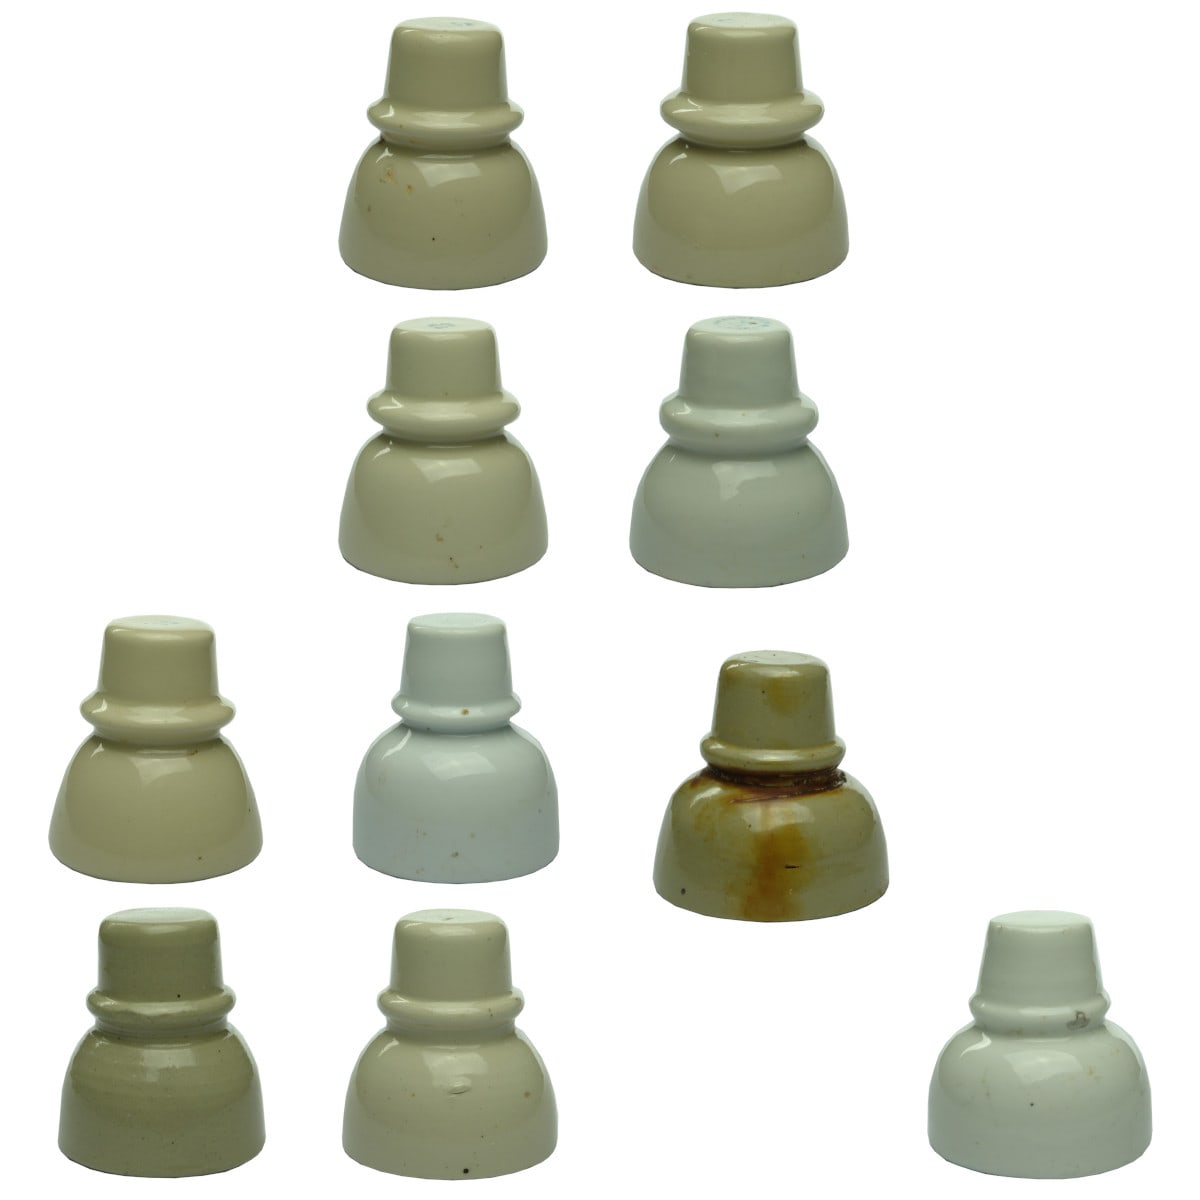 10 Porcelain Insulators. U1493. FB numbers. Made in Occupied Japan and unmarked. (Australia)